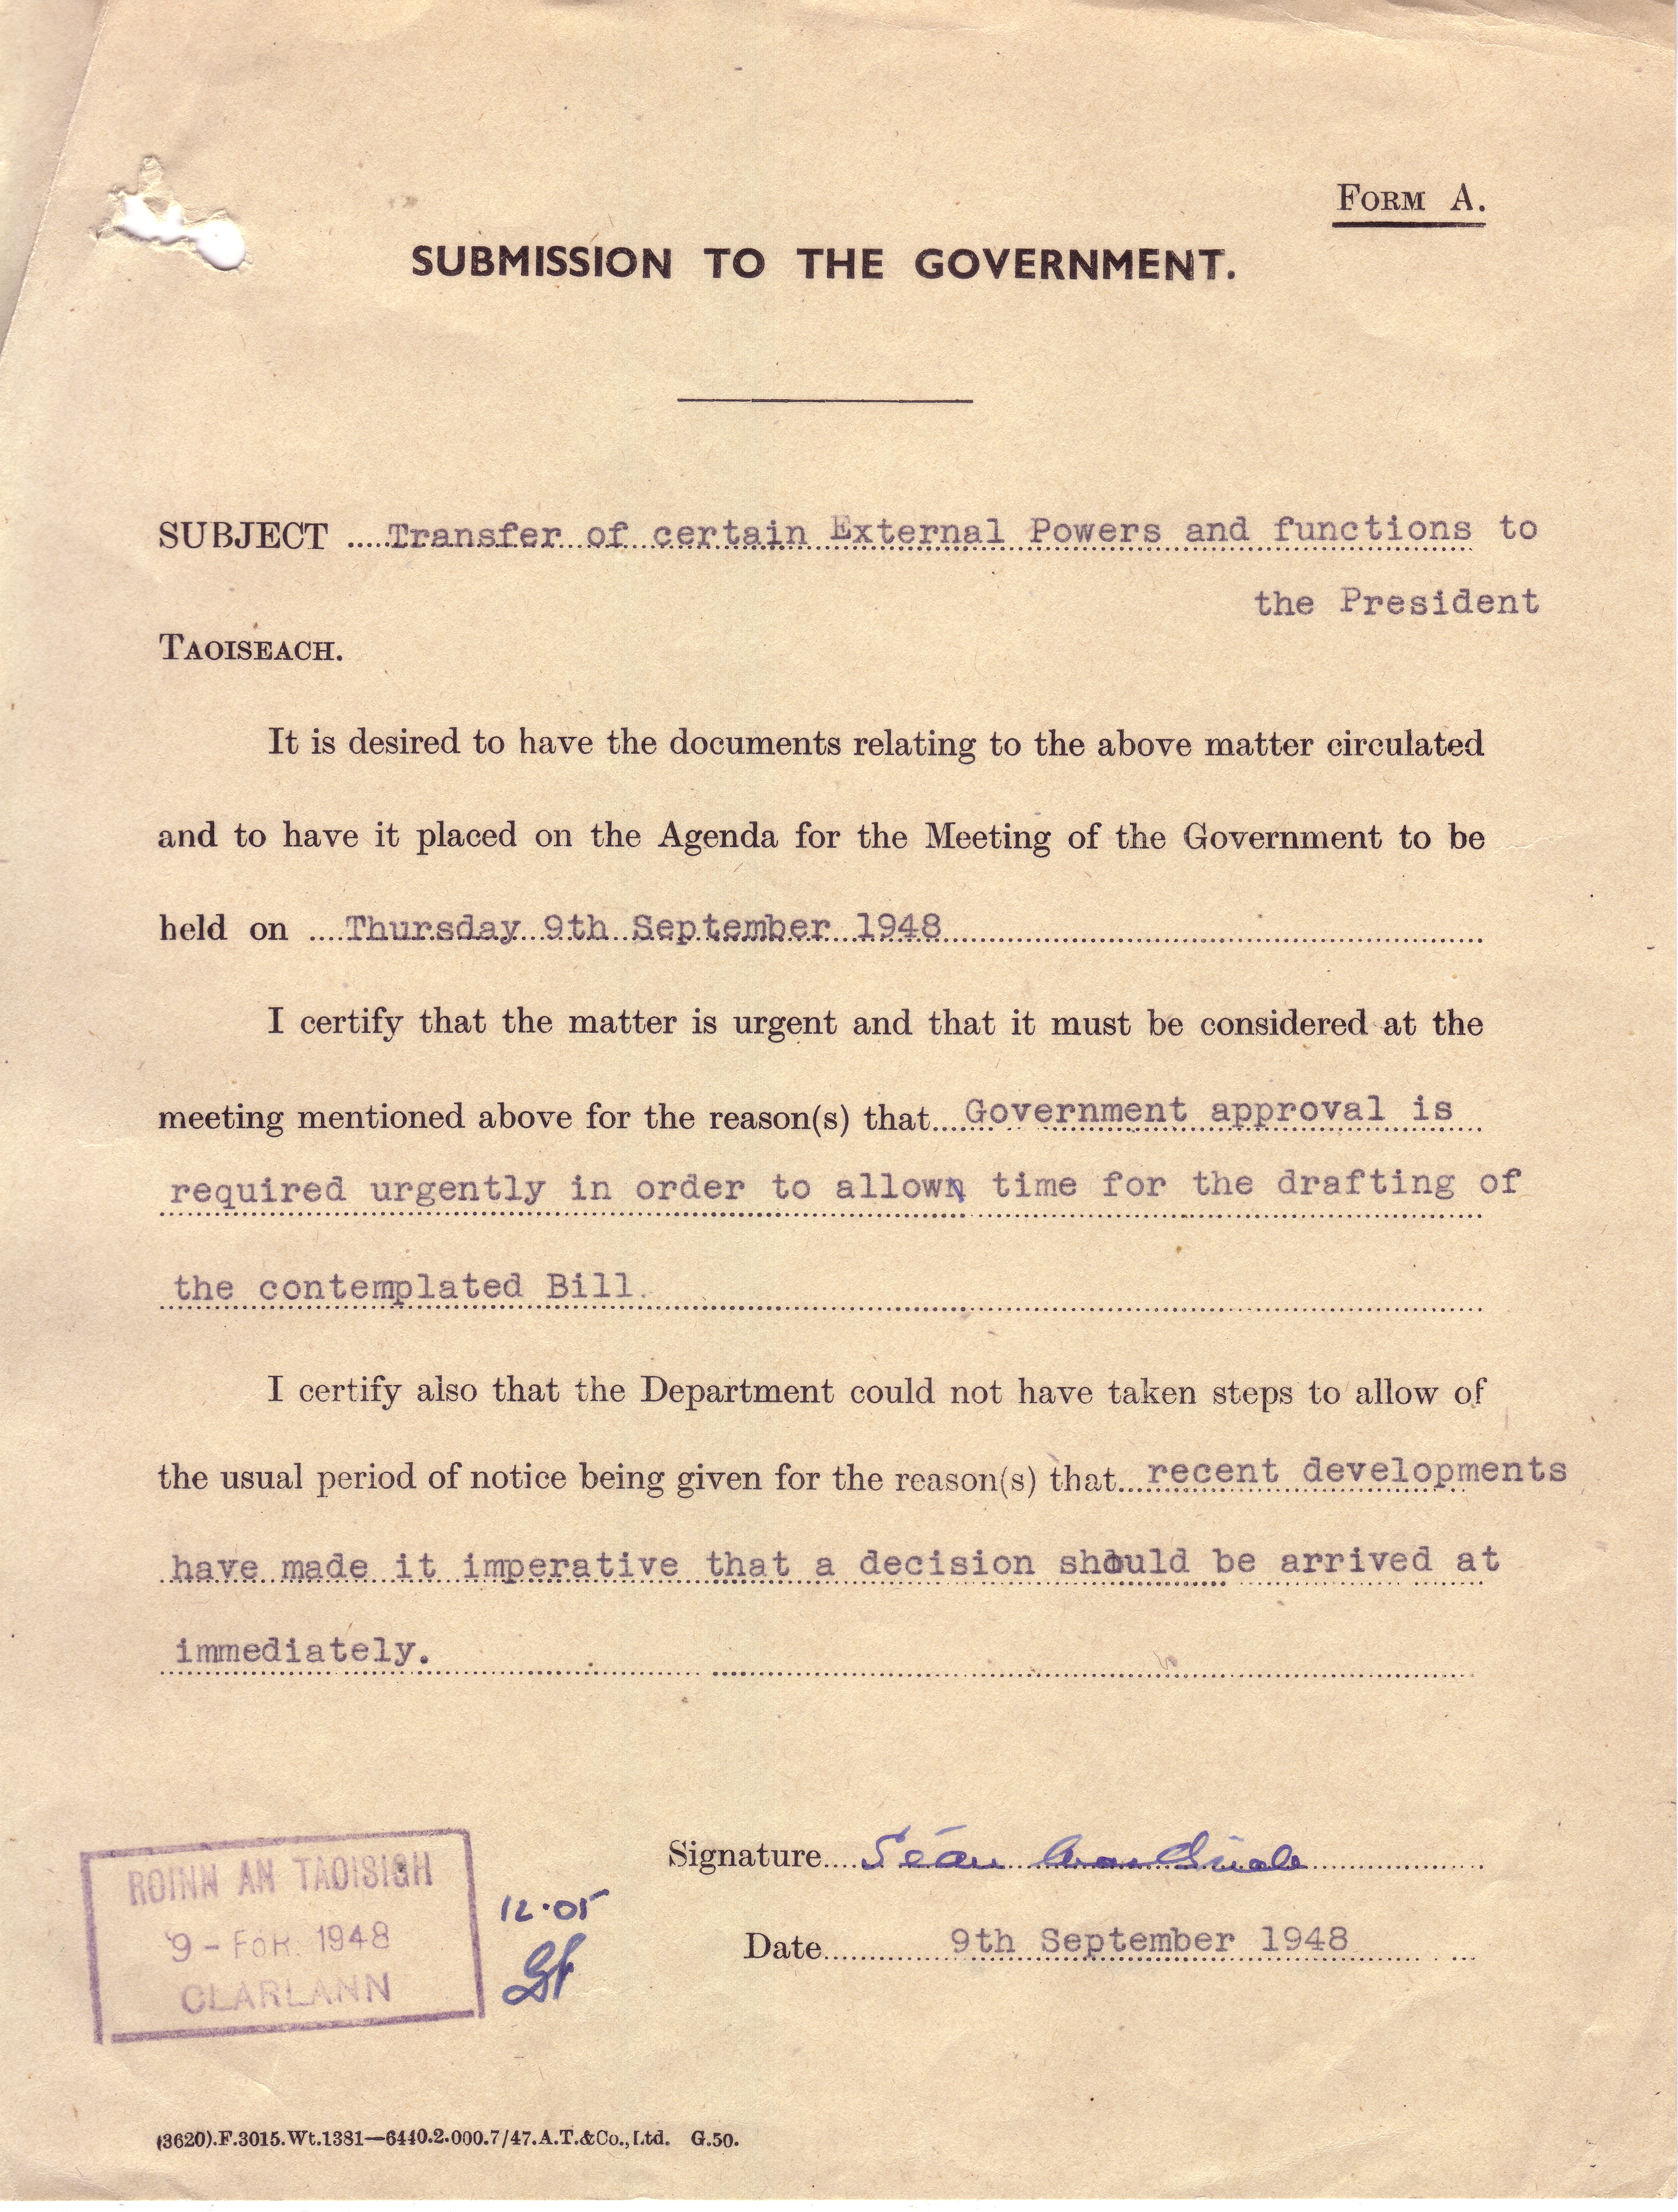 Submission to the Government (Dublin)'Transfer of certain External Powers and Functions to the President'